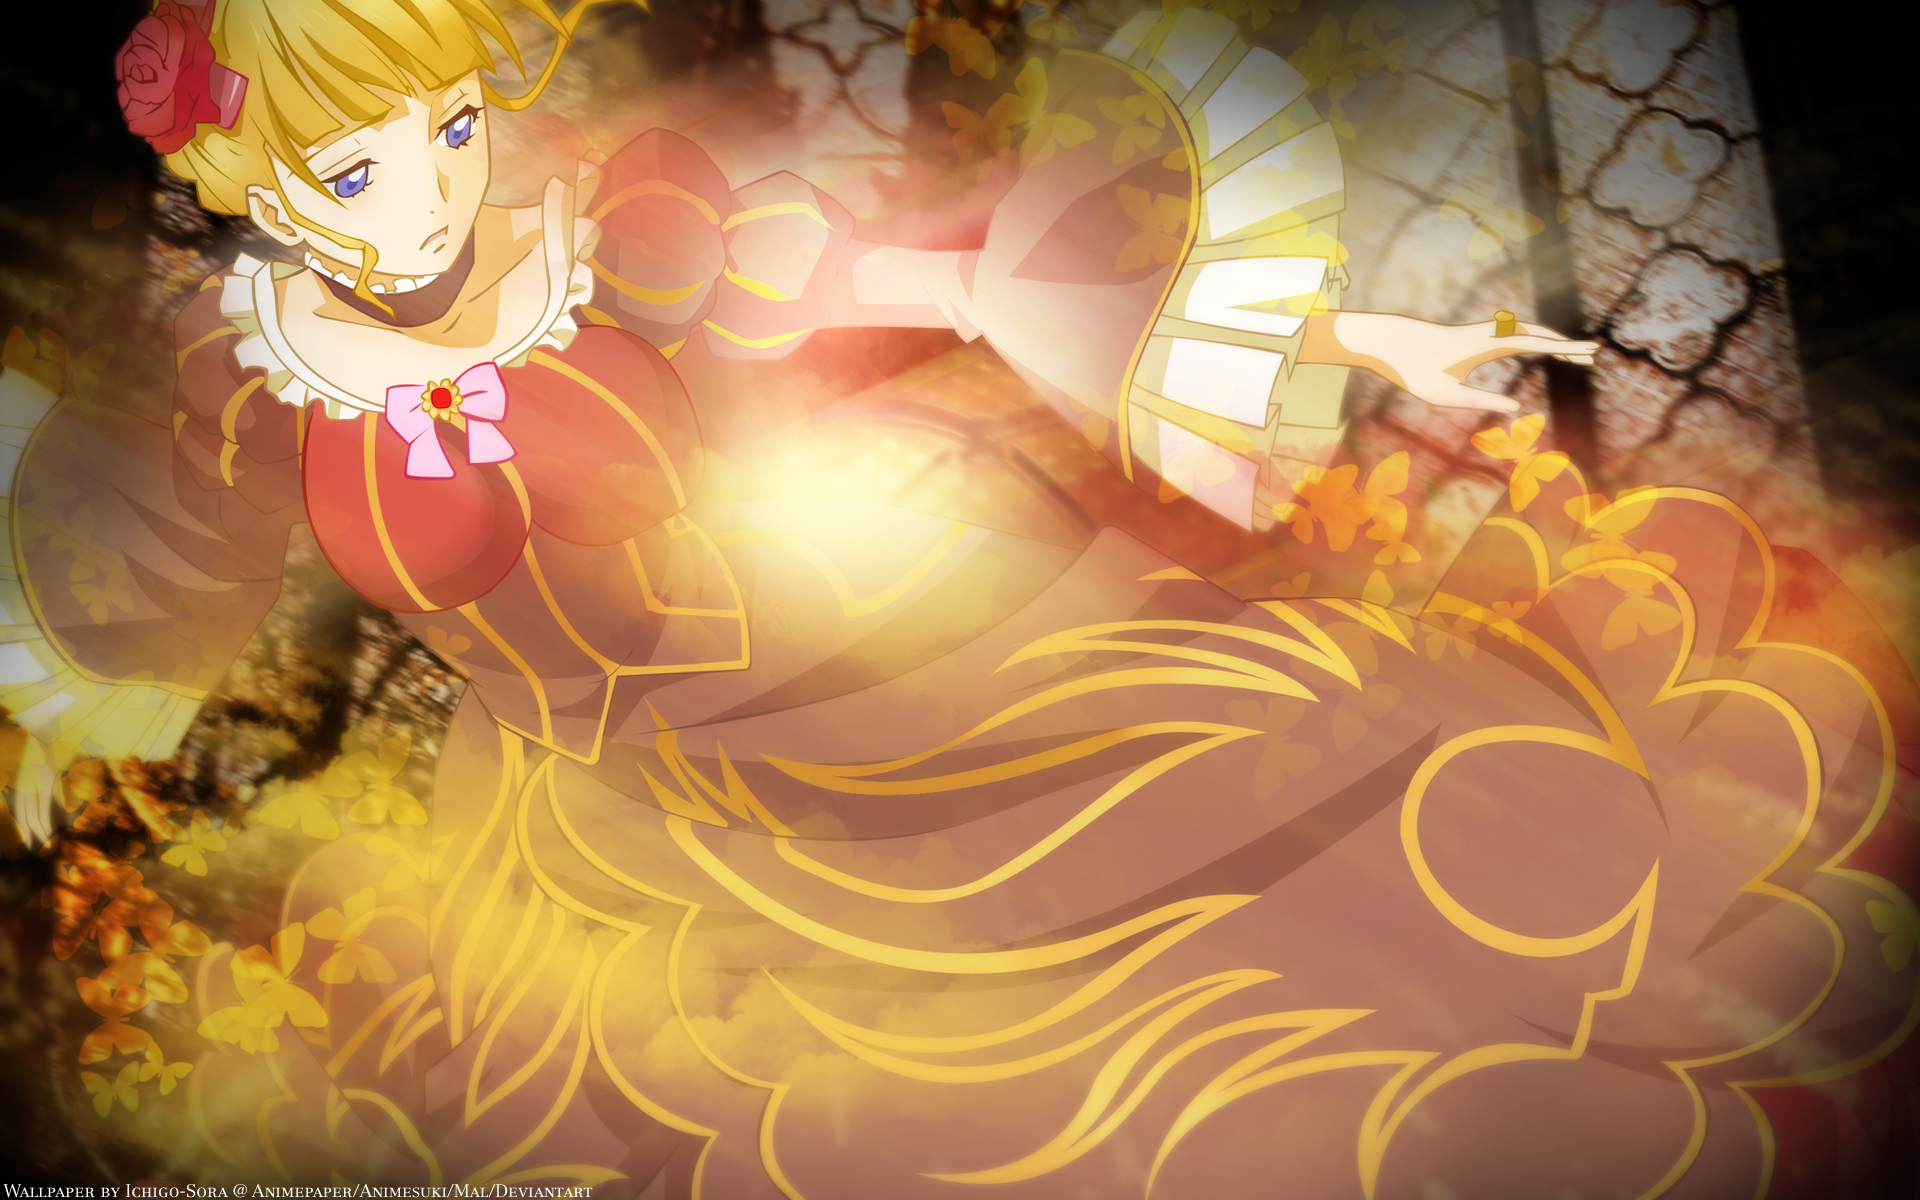 Anime character Beatrice from Umineko: When They Cry.